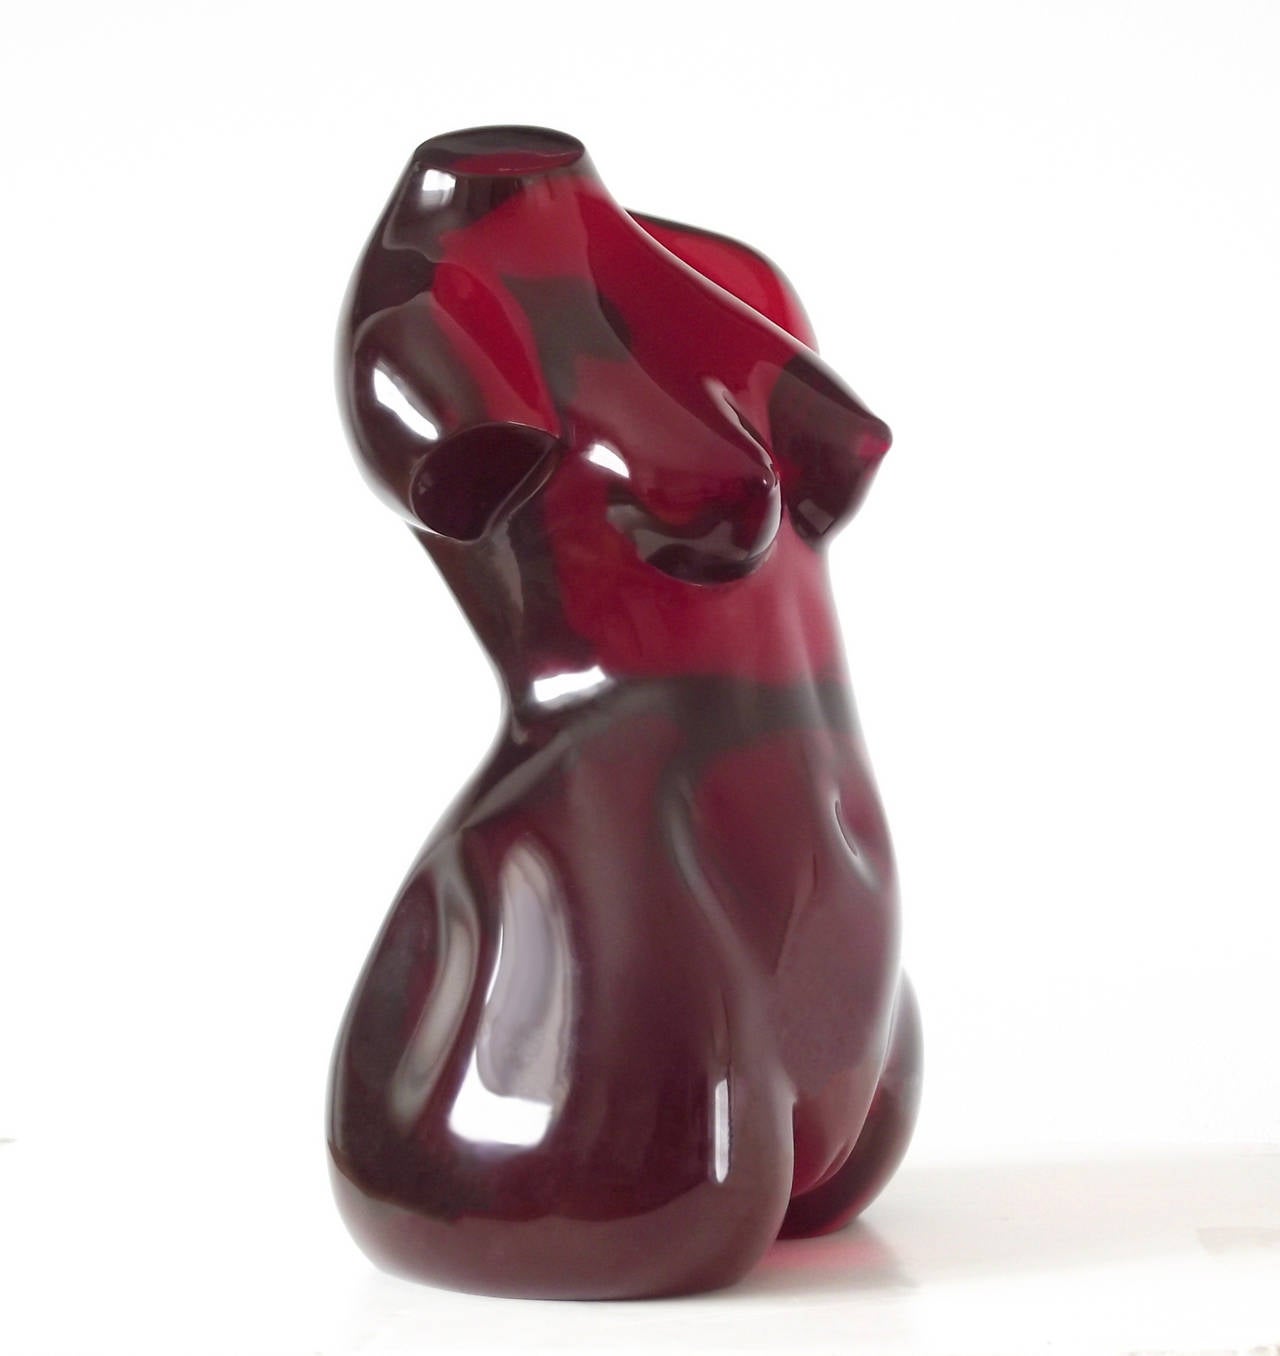 A 20th century Venus sculpture that juxtaposes the classic form with a modern medium of solid, crimson red acrylic; the perfectly smooth and lustrous surface heightens the figure's sensuality. Impressive from every angle and quite heavy at nearly 20